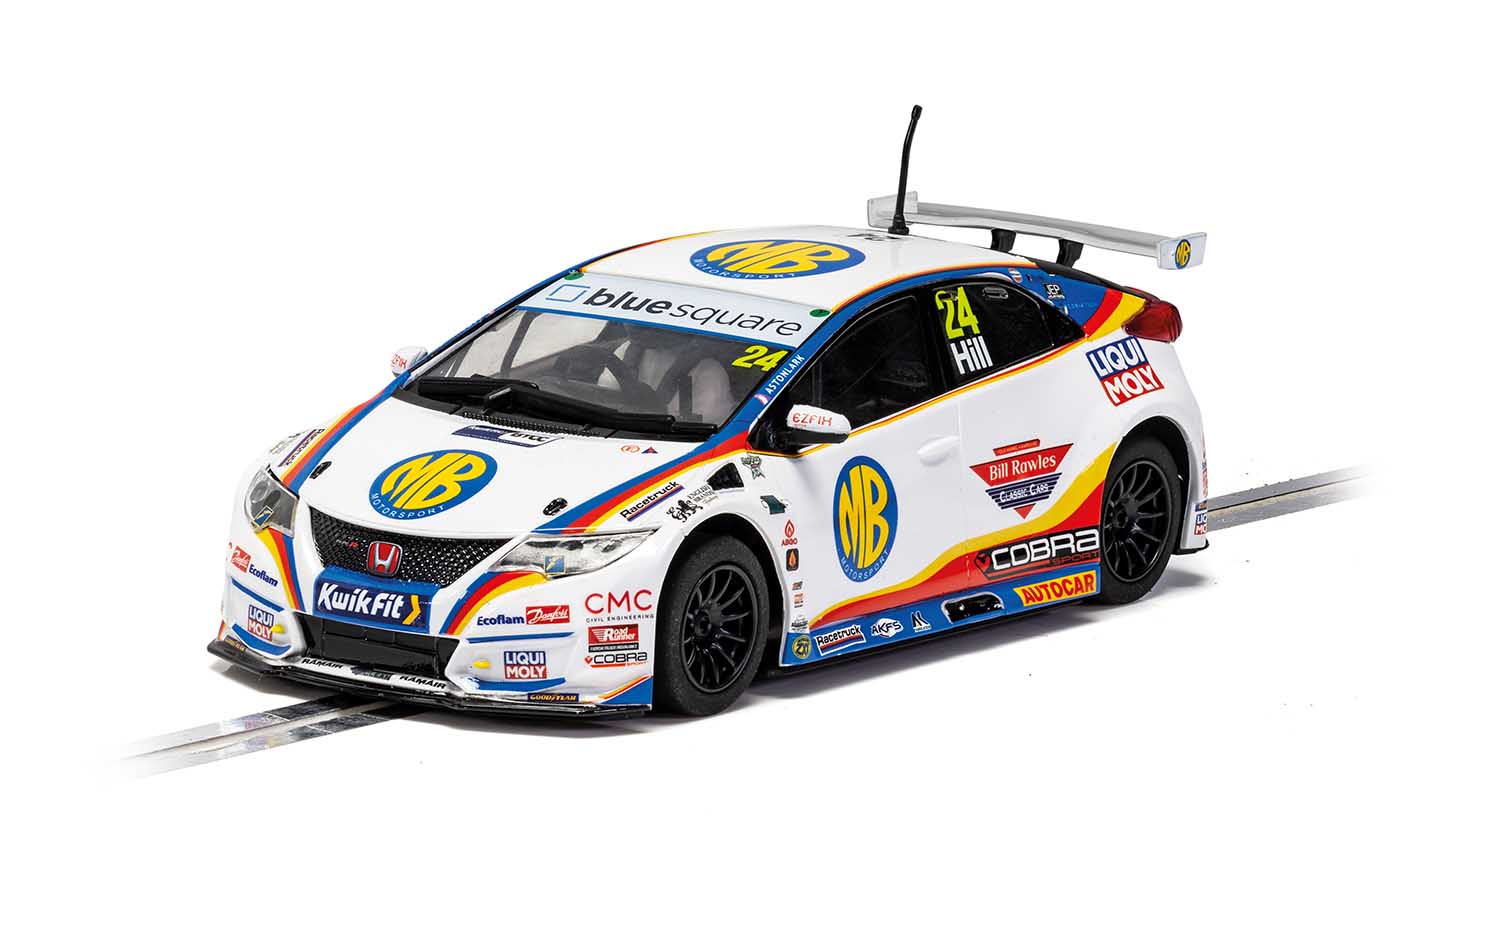 Product Image - Scalextric C4210 Honda Civic Type-R NGTC - Jake Hill 2020 Slot Car 1:32 Scale 